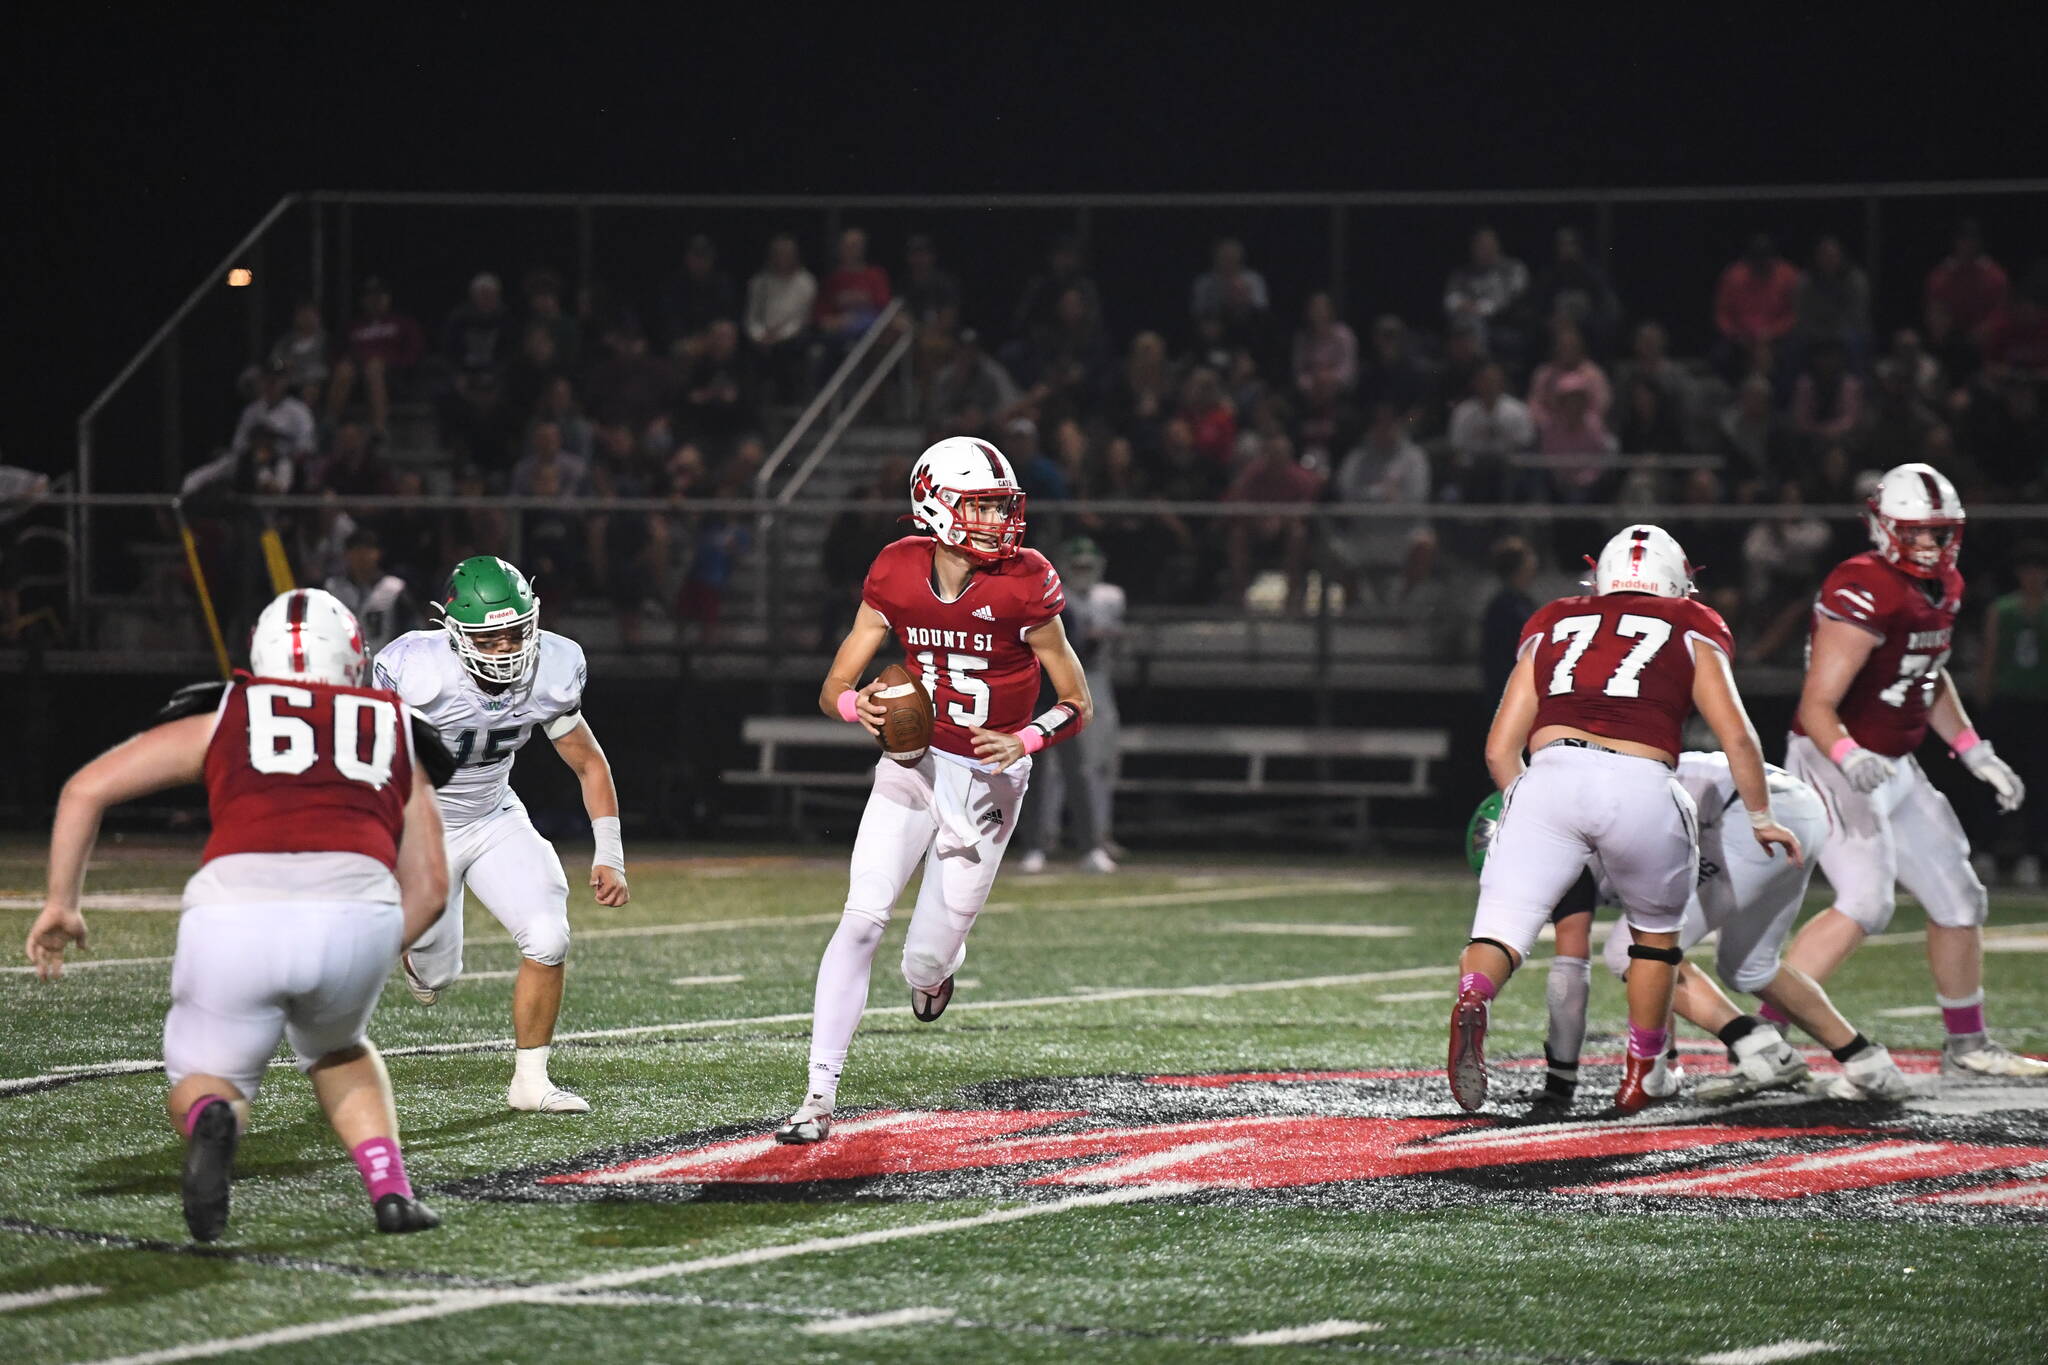 Photo courtesy of Calder Productions. Senior Quarterback Cyrus Turley scrambles in a 26-0 win over Woodinville on Oct 7.